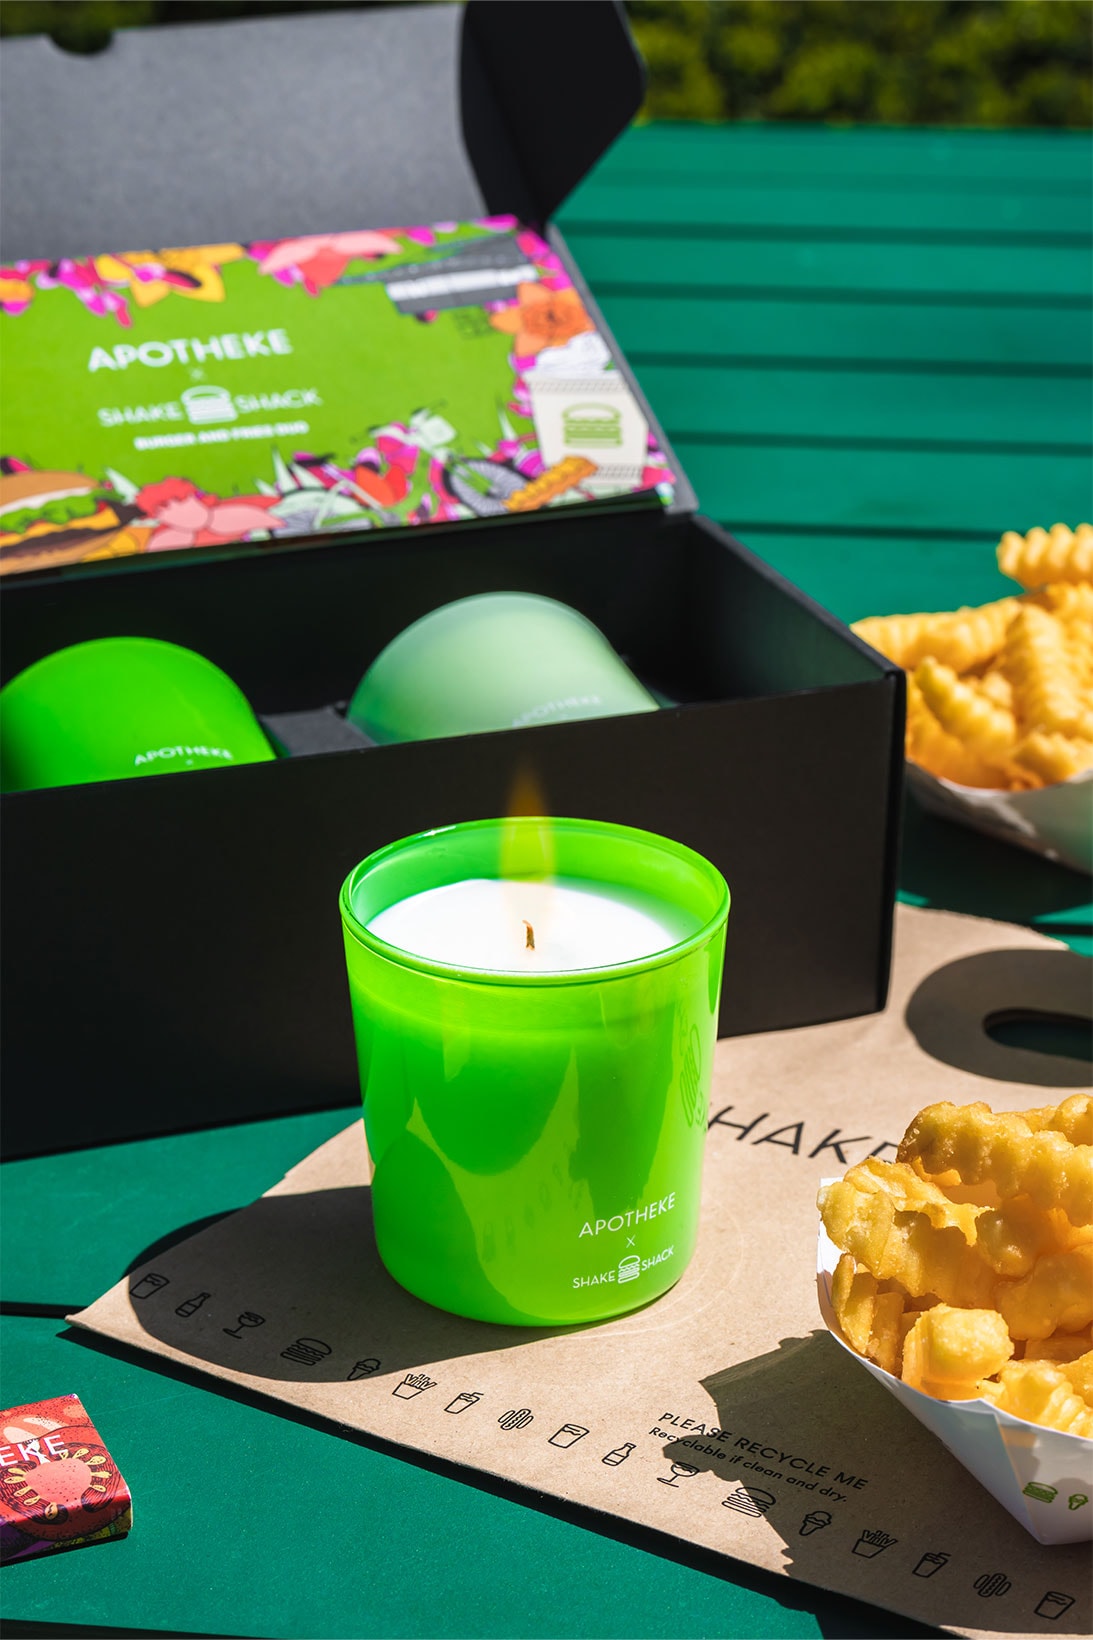 Shake Shack Apotheke Candles Burger and Fries Duo Burger In The Park Release Where to buy